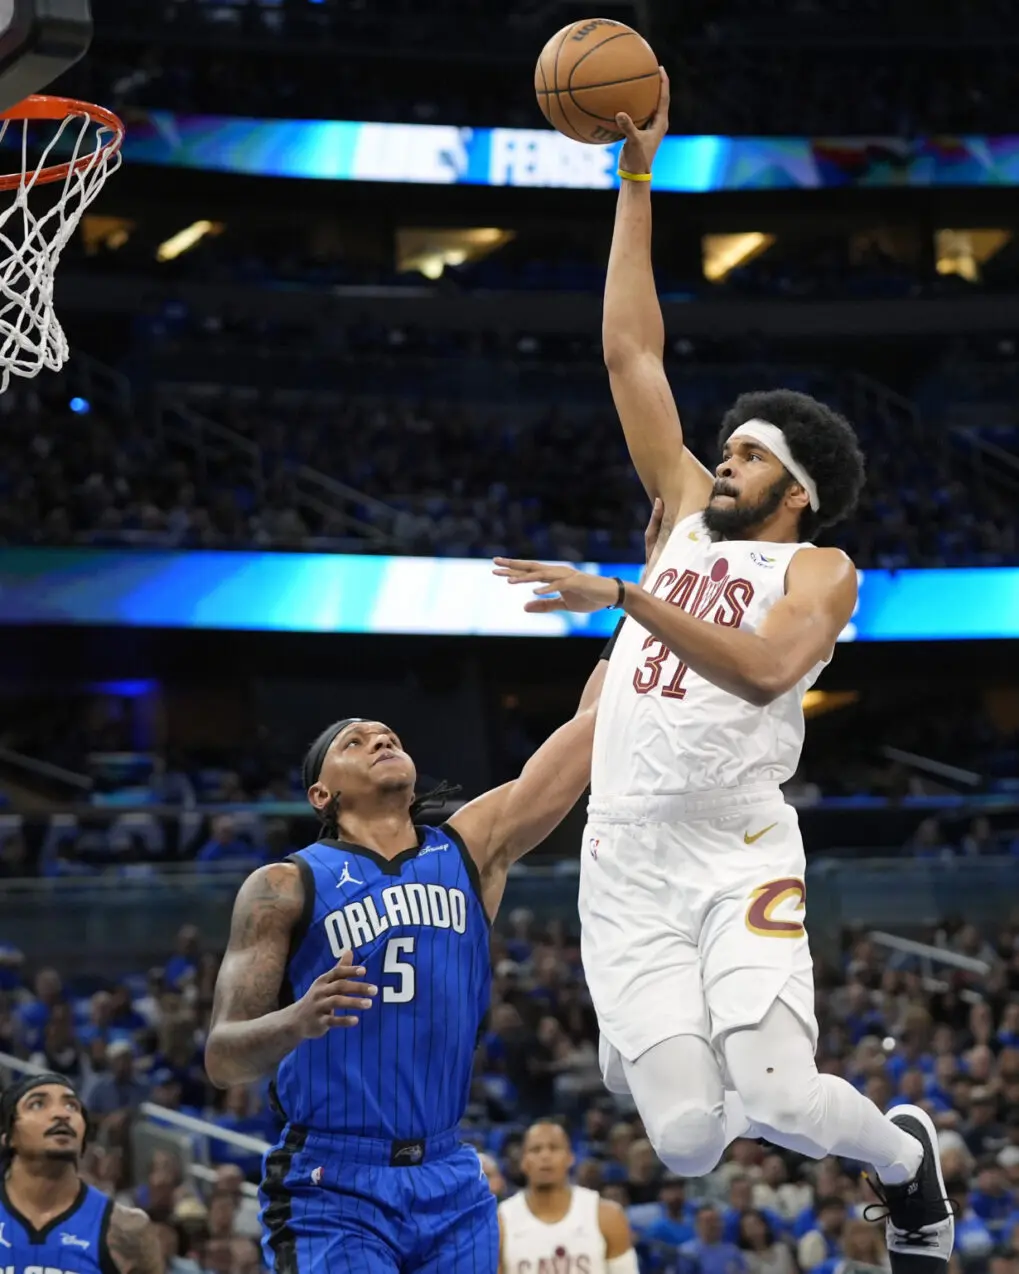 LA Post: Cavs center Jarrett Allen is out for Game 7 vs. Magic with rib injury, missing 3rd game in series